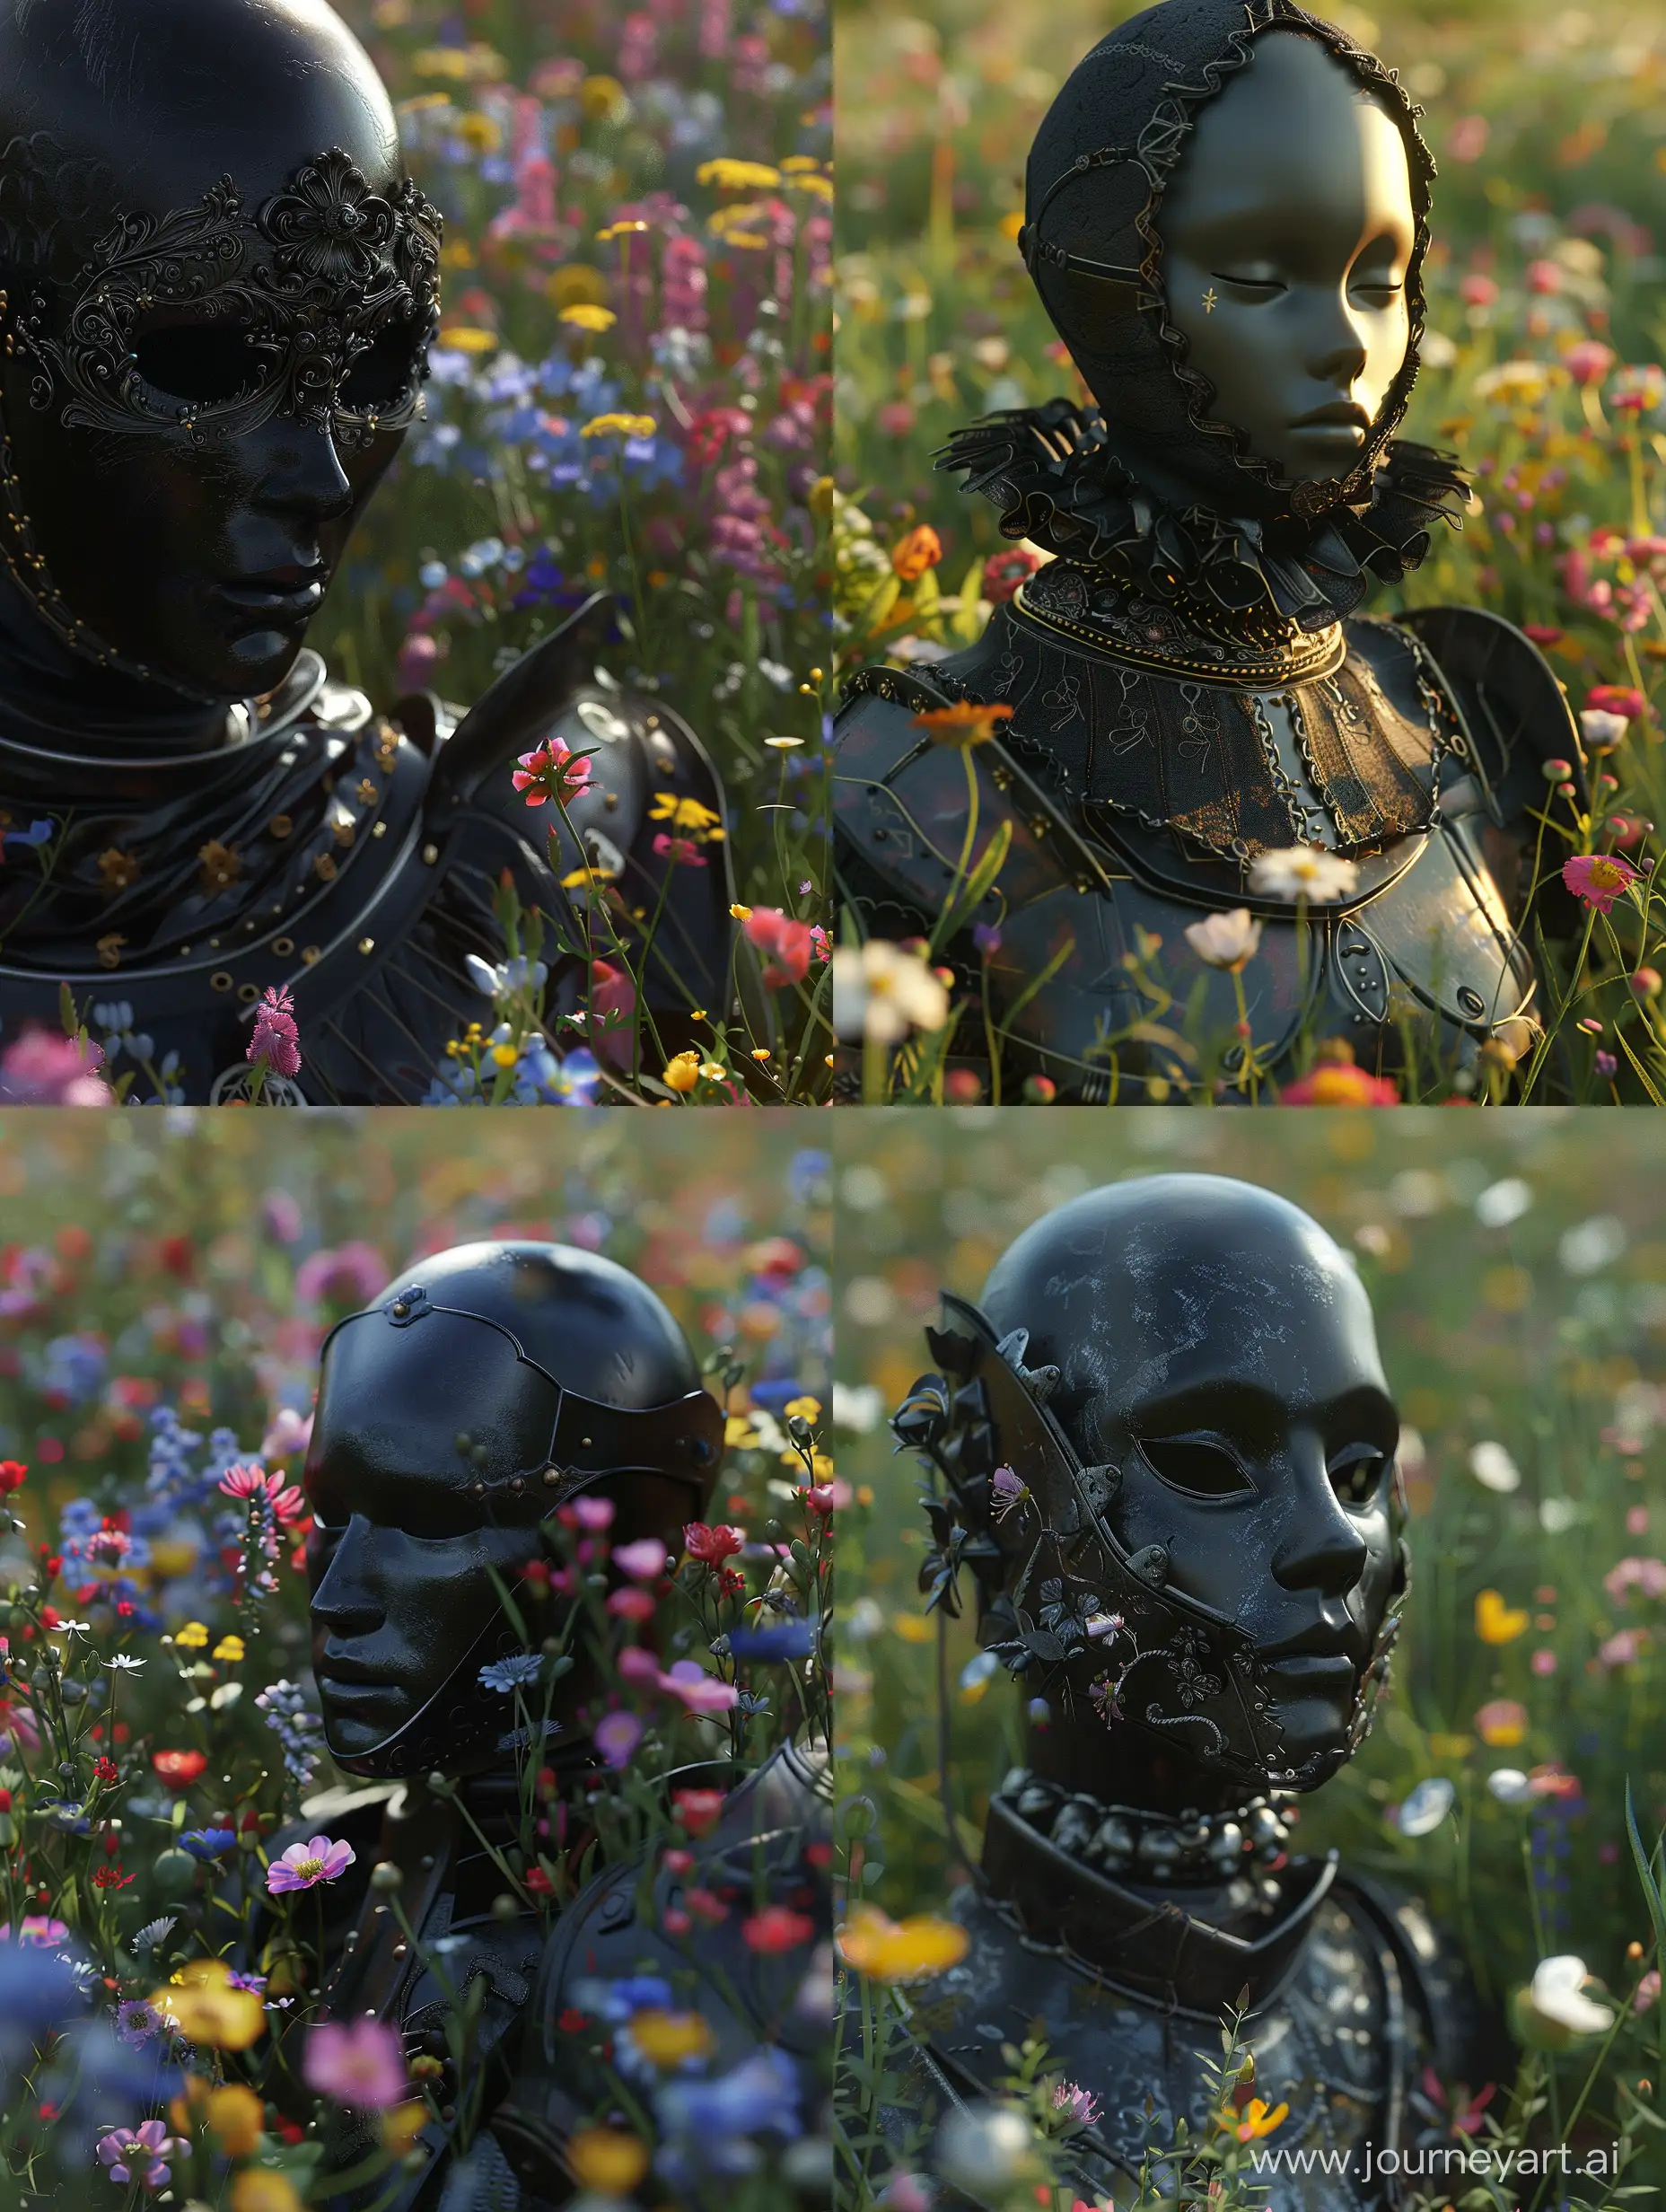 a close up of a mannequin in a field of flowers, a picture, by Robert Brackman, cg society contest winner, renaissance, black pulcinella mask, film still from horror movie, victorian armor, 4k symmetrical portrait